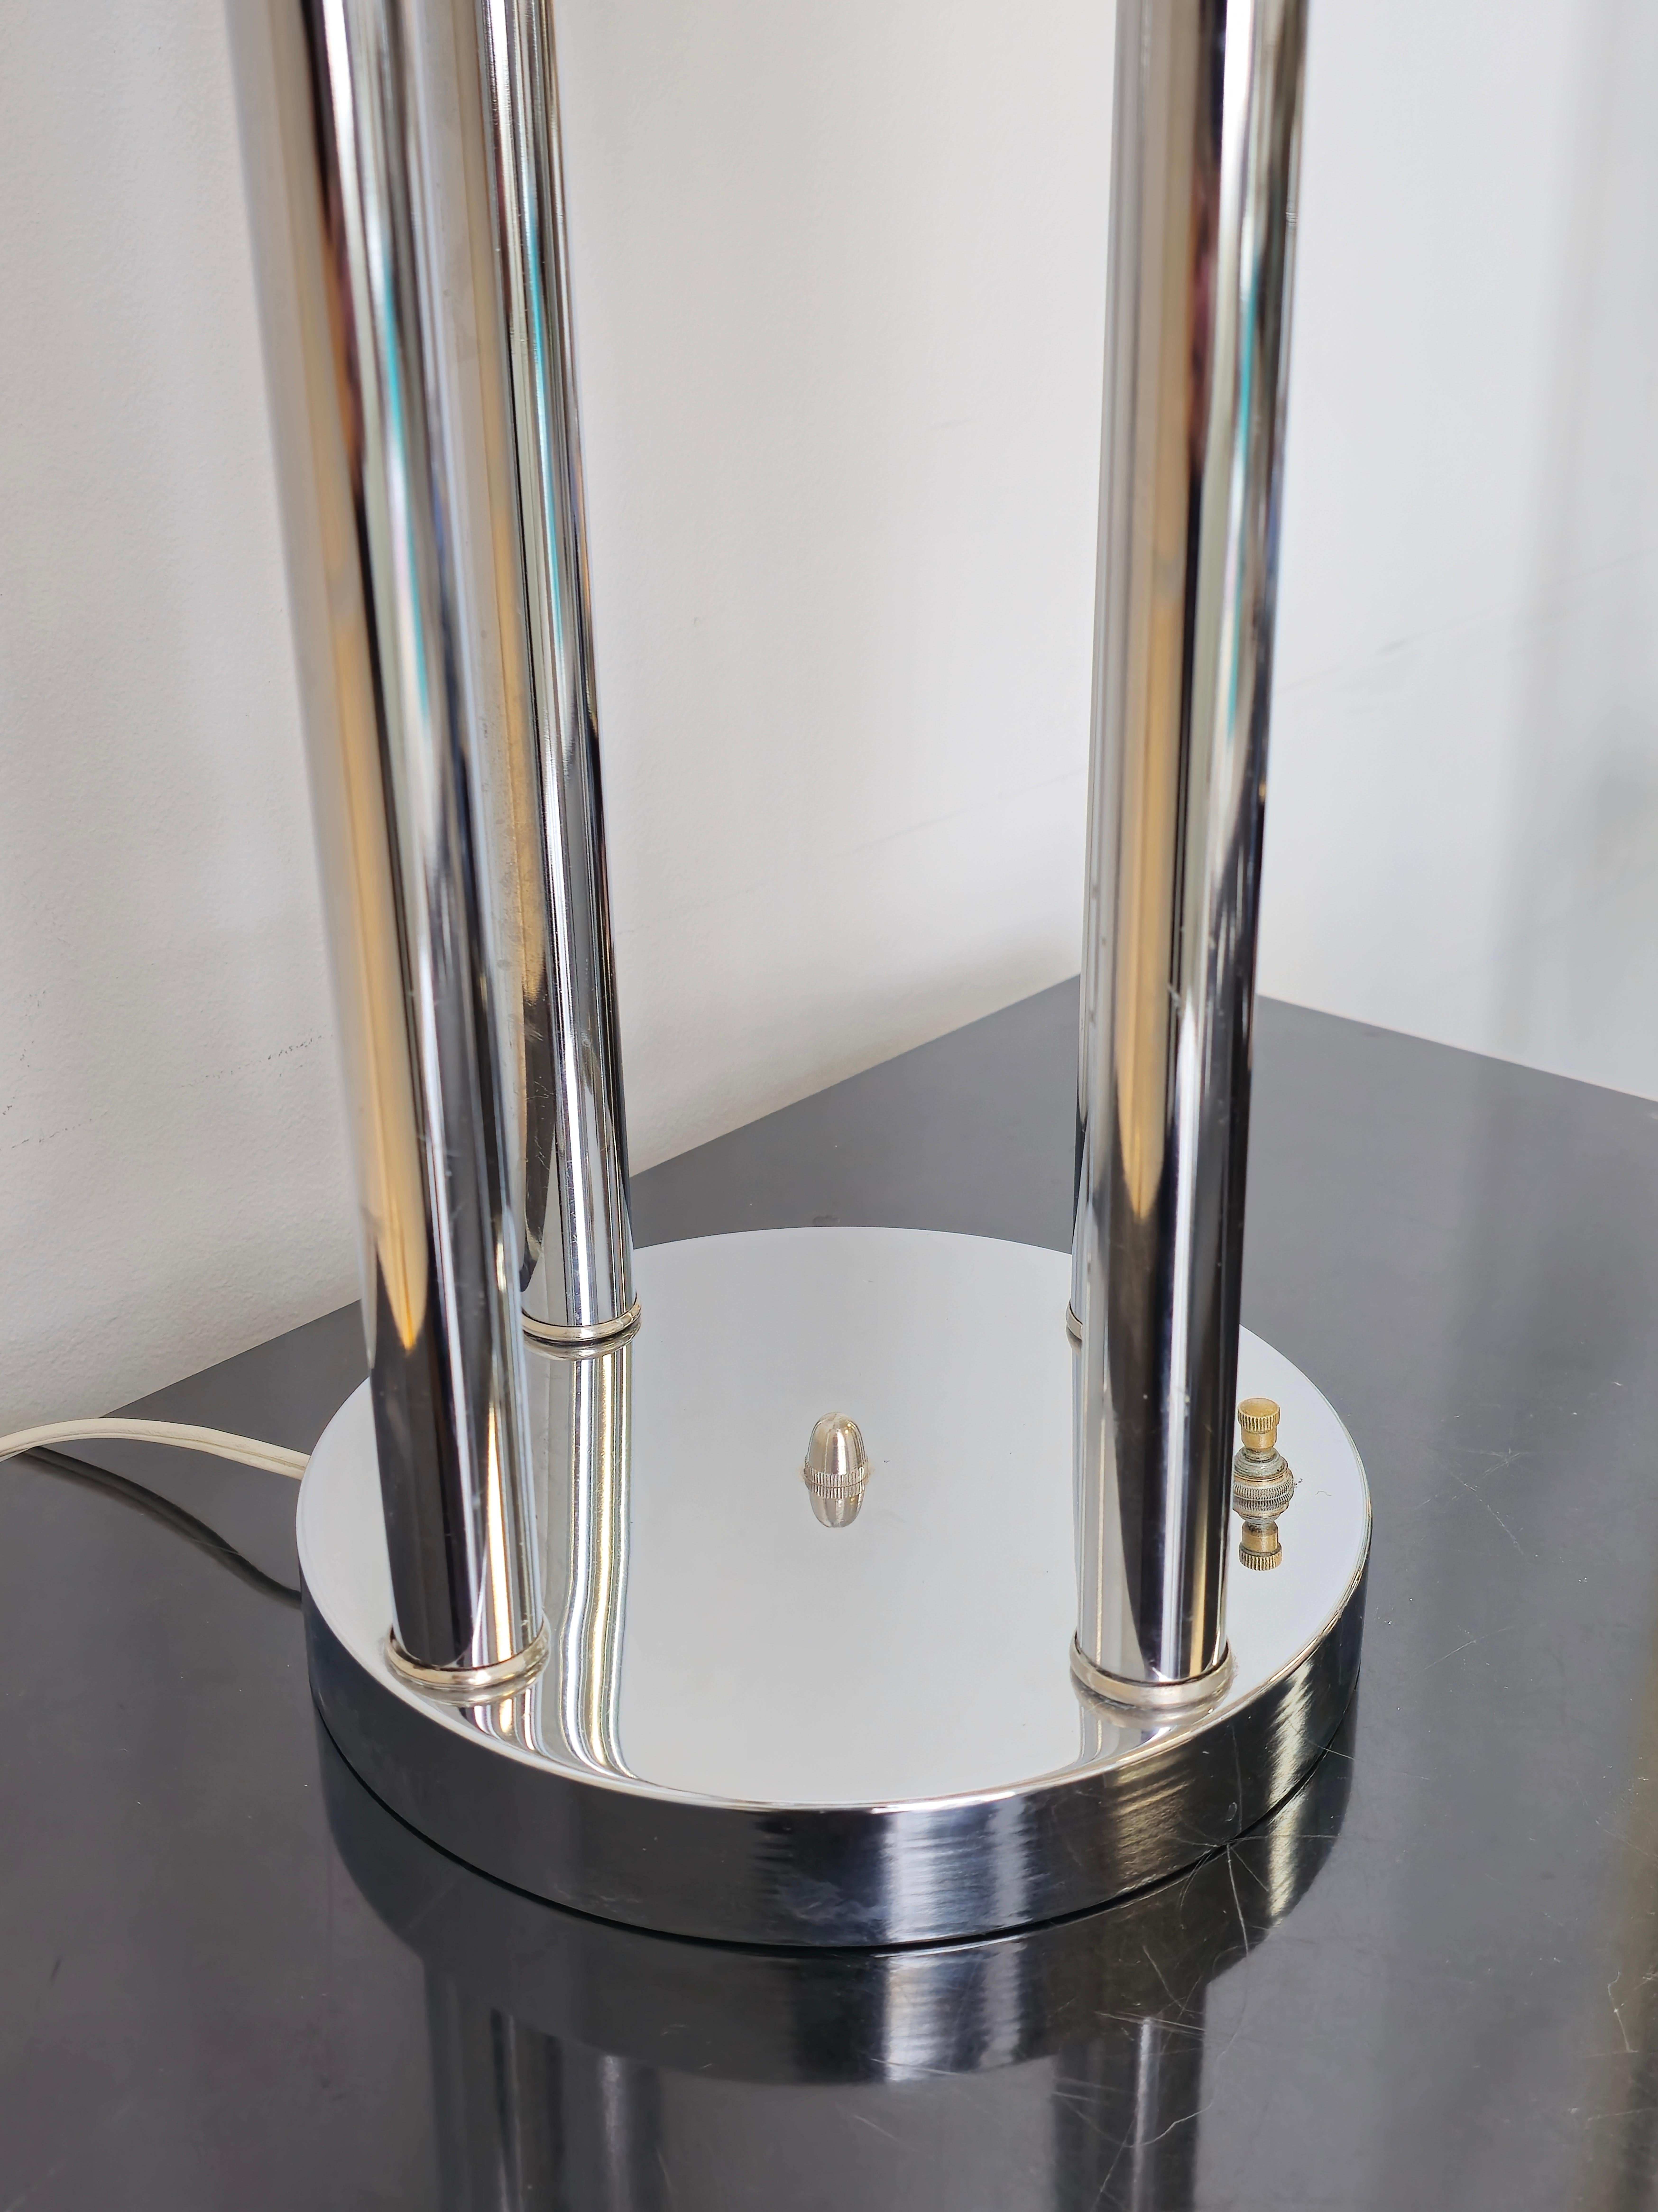 Super cool space age style chrome table lamp. This table lamp is from the 1970s. It features four tiers in varying heights. The four stems of the lamp are each attached to a round shaped orb which each holds a lightbulb. It's wired for North